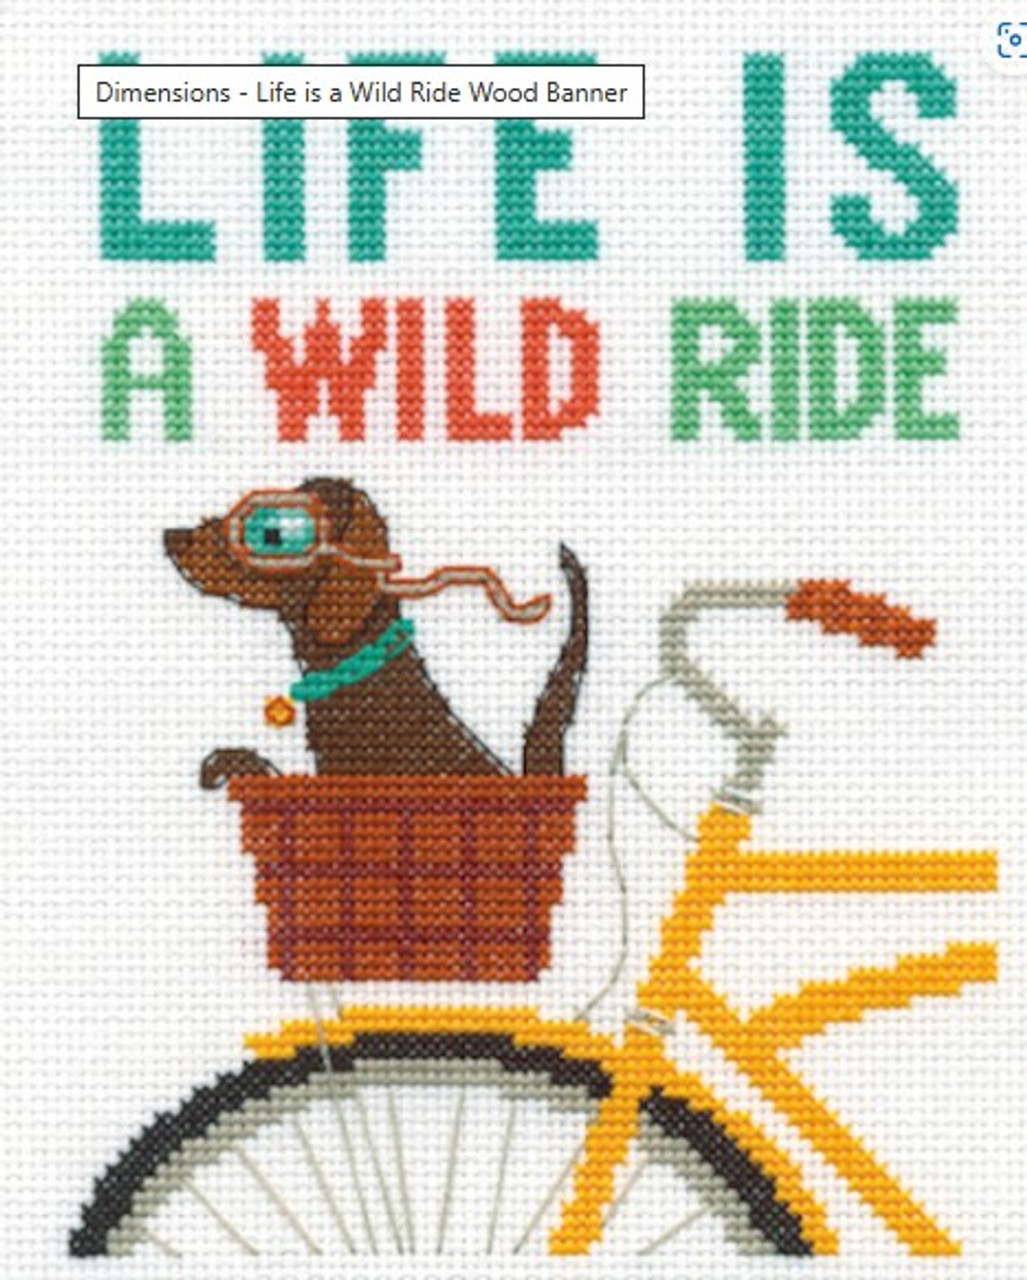 Dimensions Life is a Wild Ride counted cross-stitch Kit with 14-count aida, needle, threads & wooden hanger - 8" x 11.5" finished